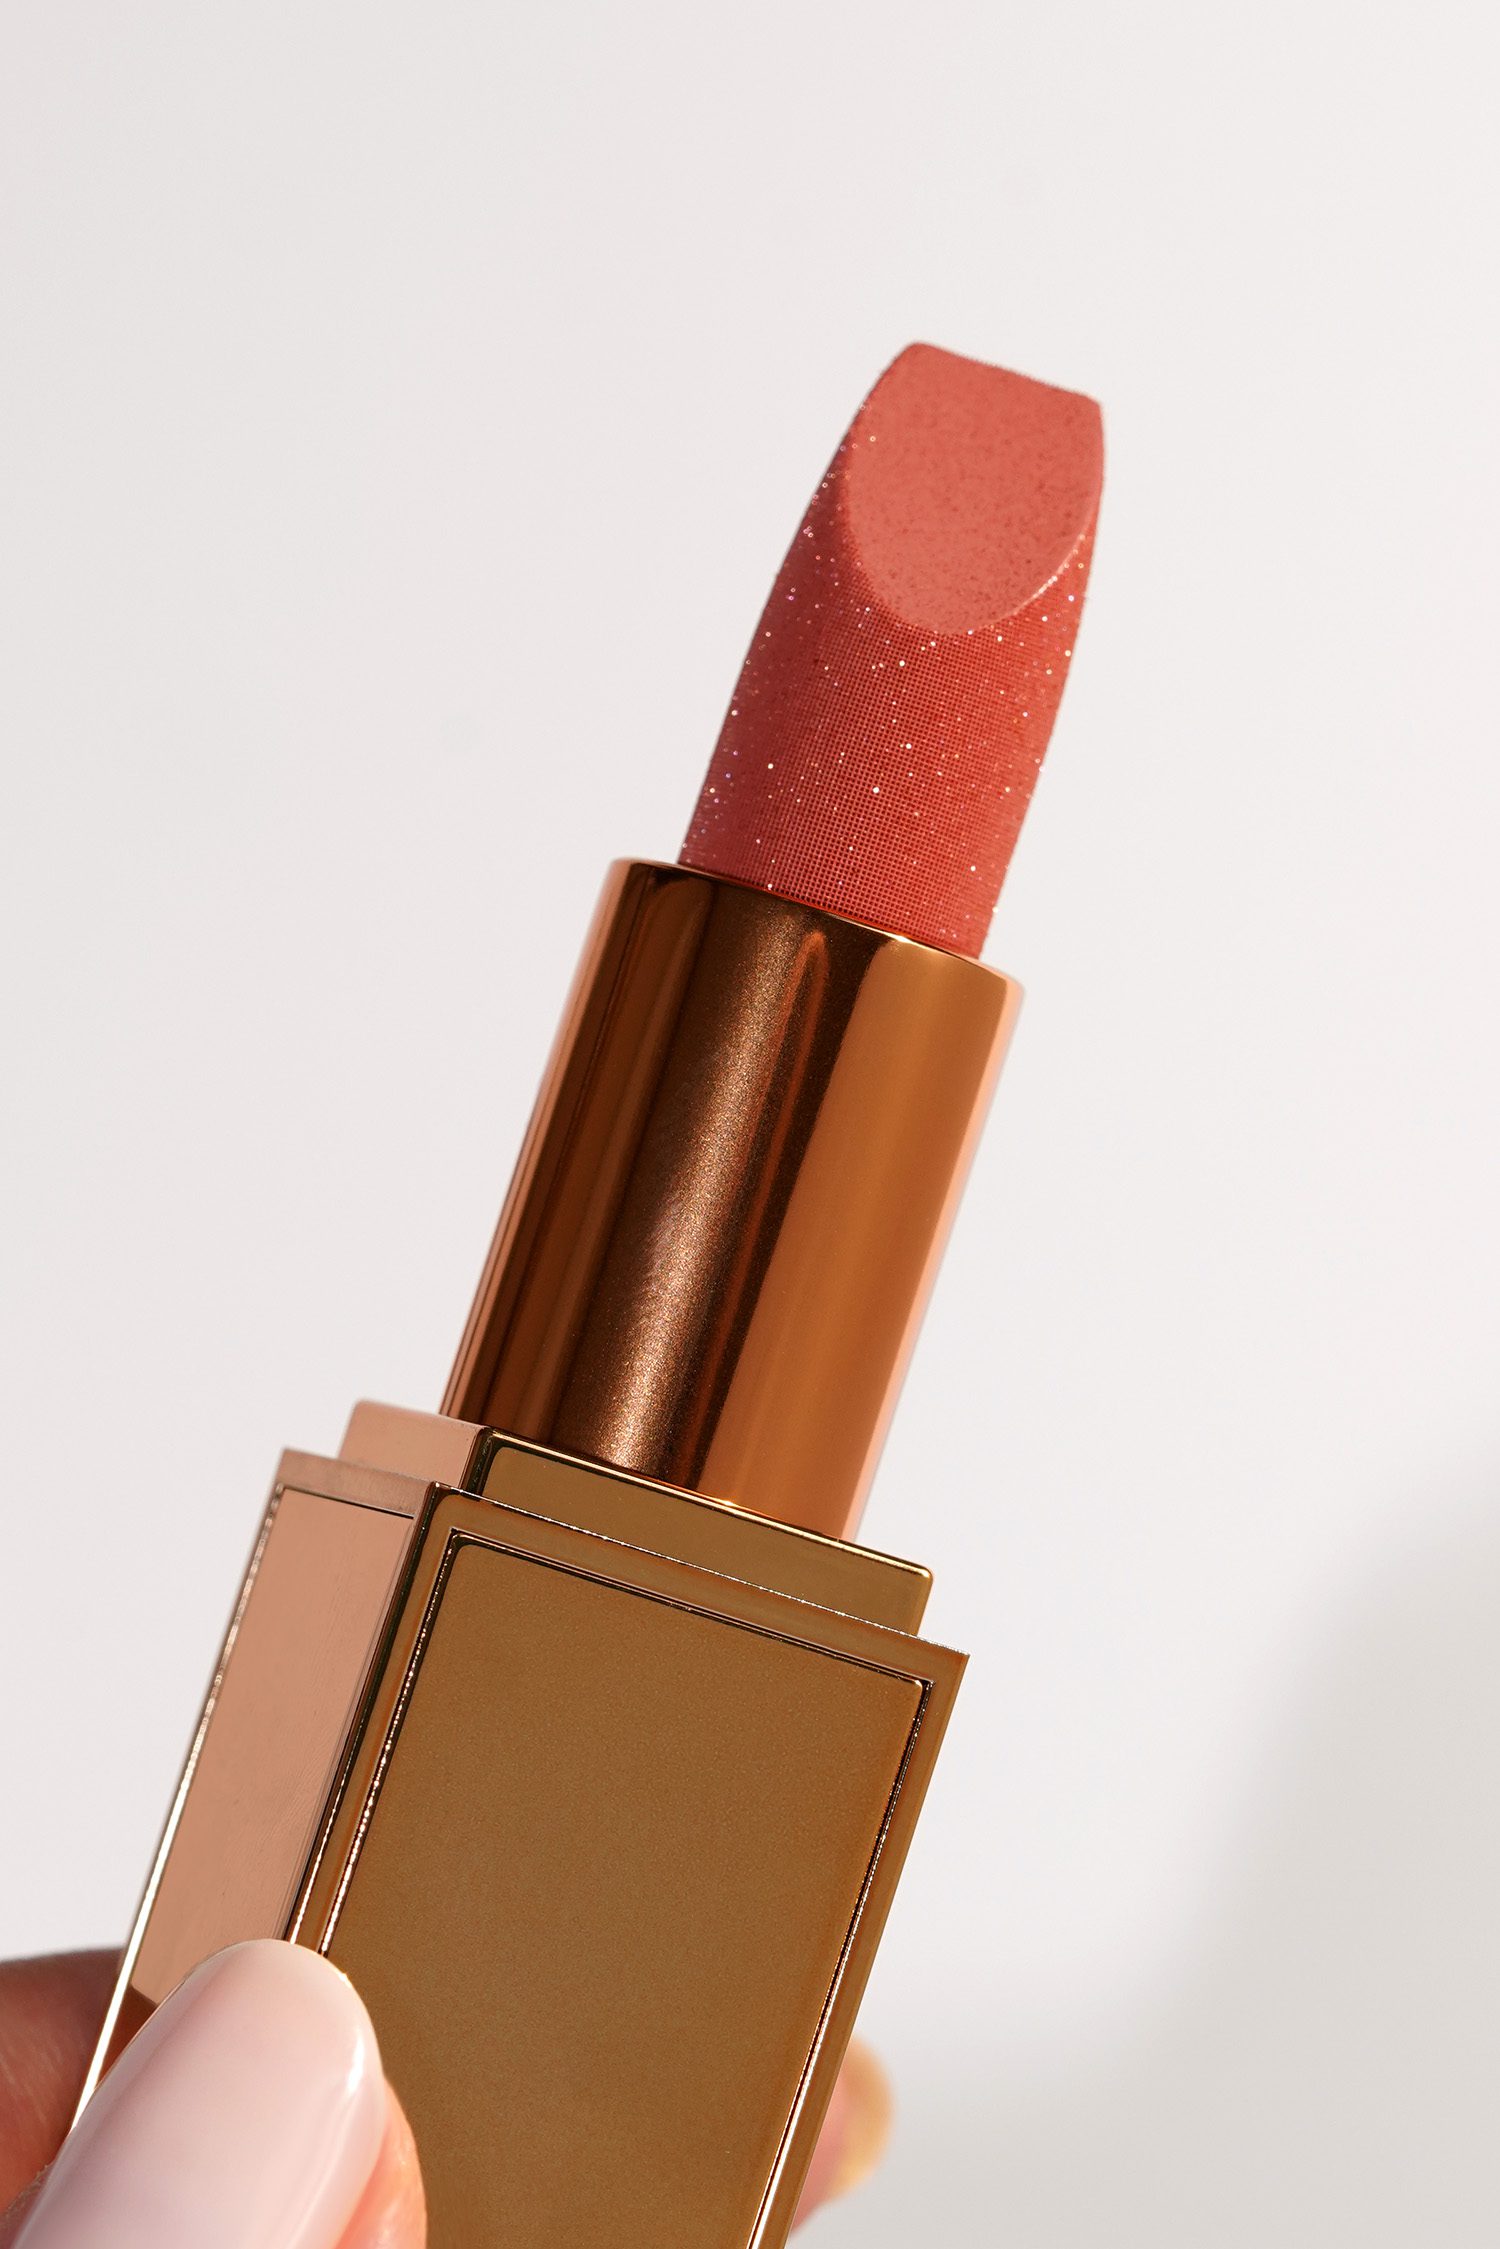 9 makeup products to add to your summer routine from L'Oréal, Tom Ford